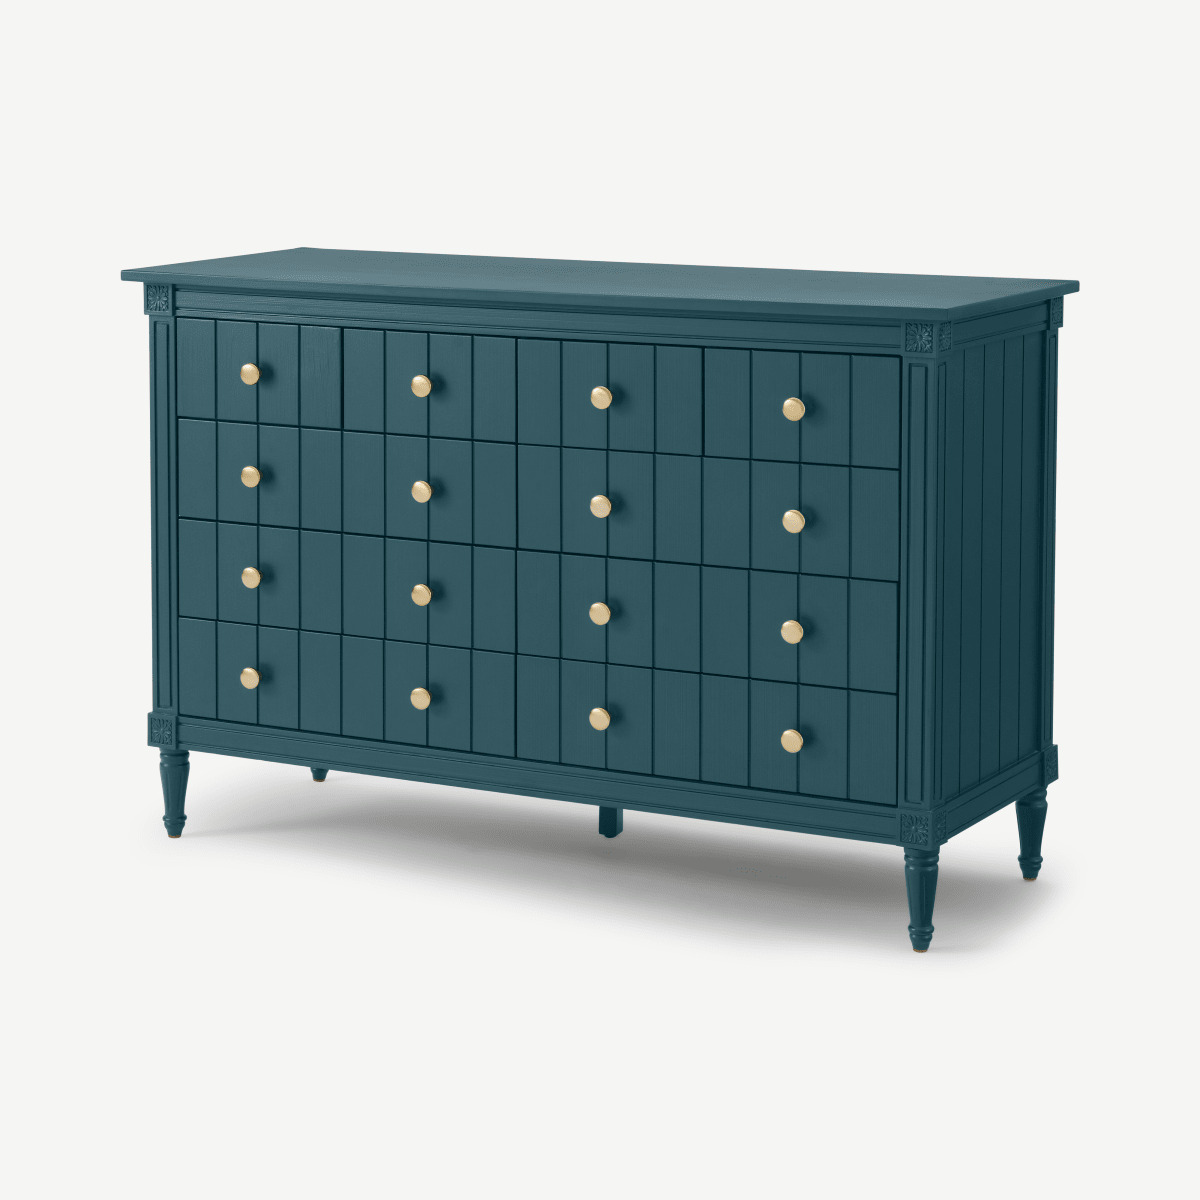 Bourbon Vintage Wide Chest Of Drawers, Petrol Blue & Brass